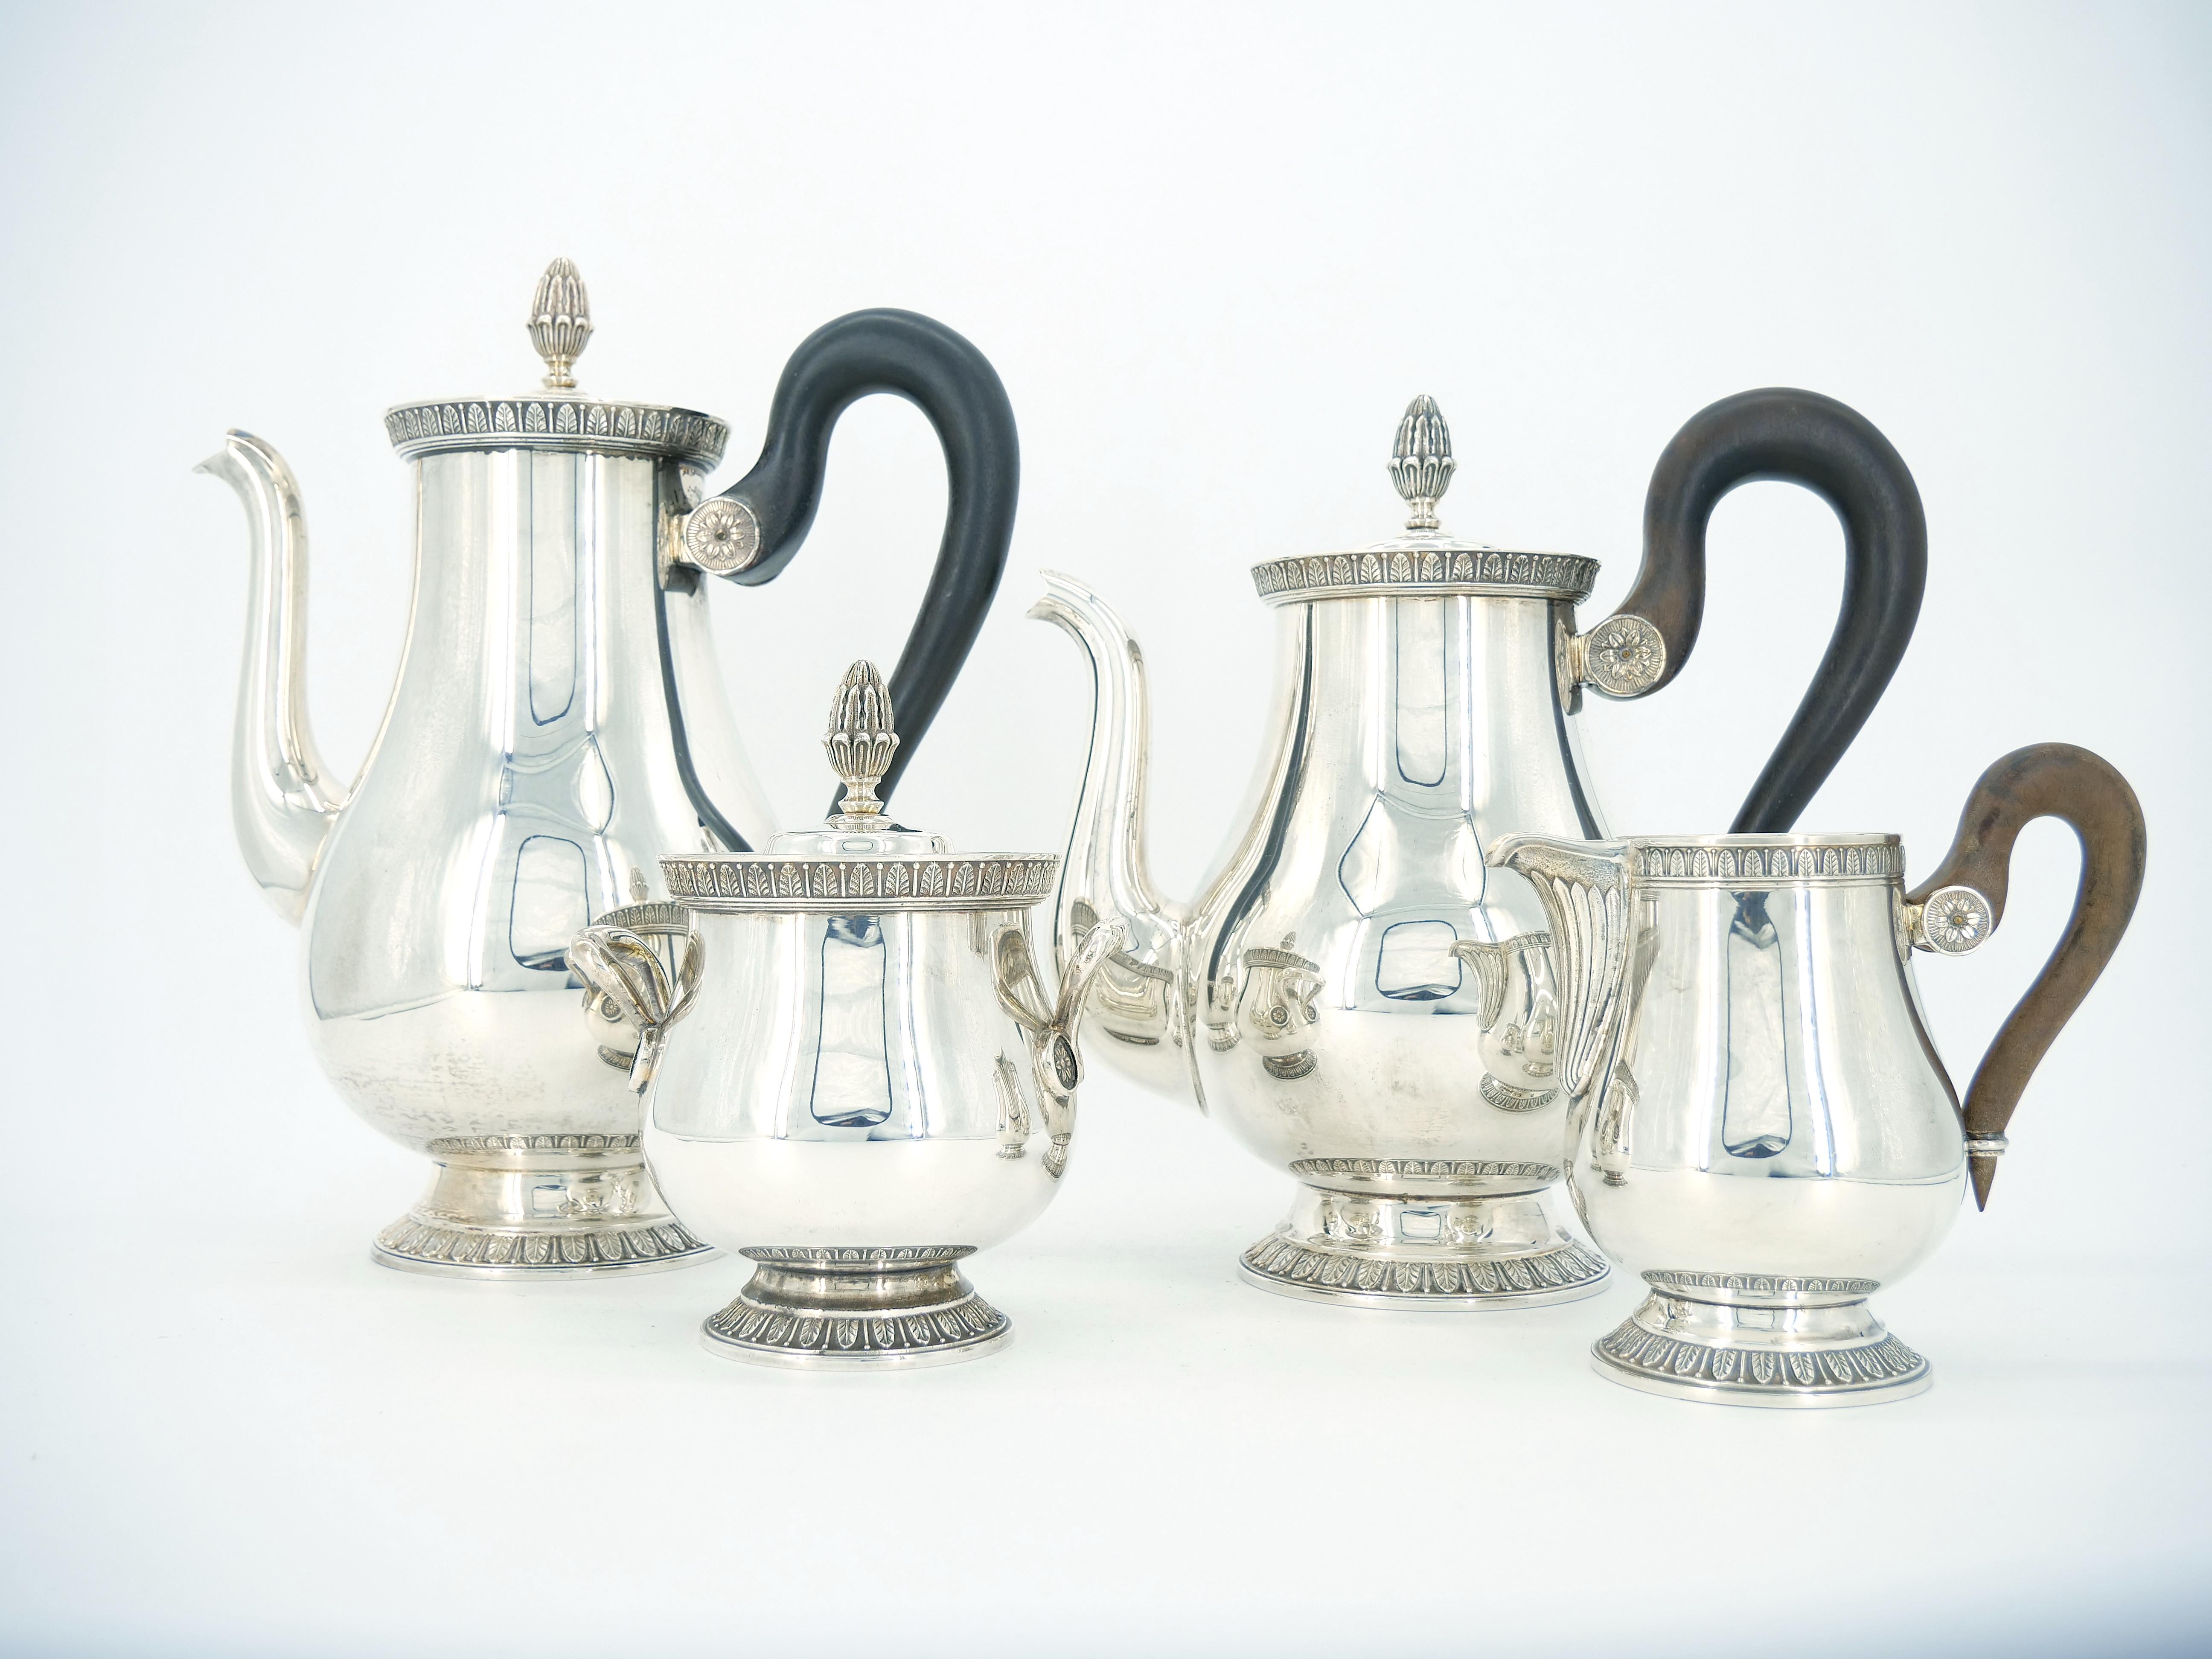 Indulge in the timeless allure of this neoclassical design with this opulent five-piece coffee and tea set meticulously crafted by the esteemed Christofle. This exquisite service, featuring a coffee pot, tea pot, milk jug, sugar bowl, and a